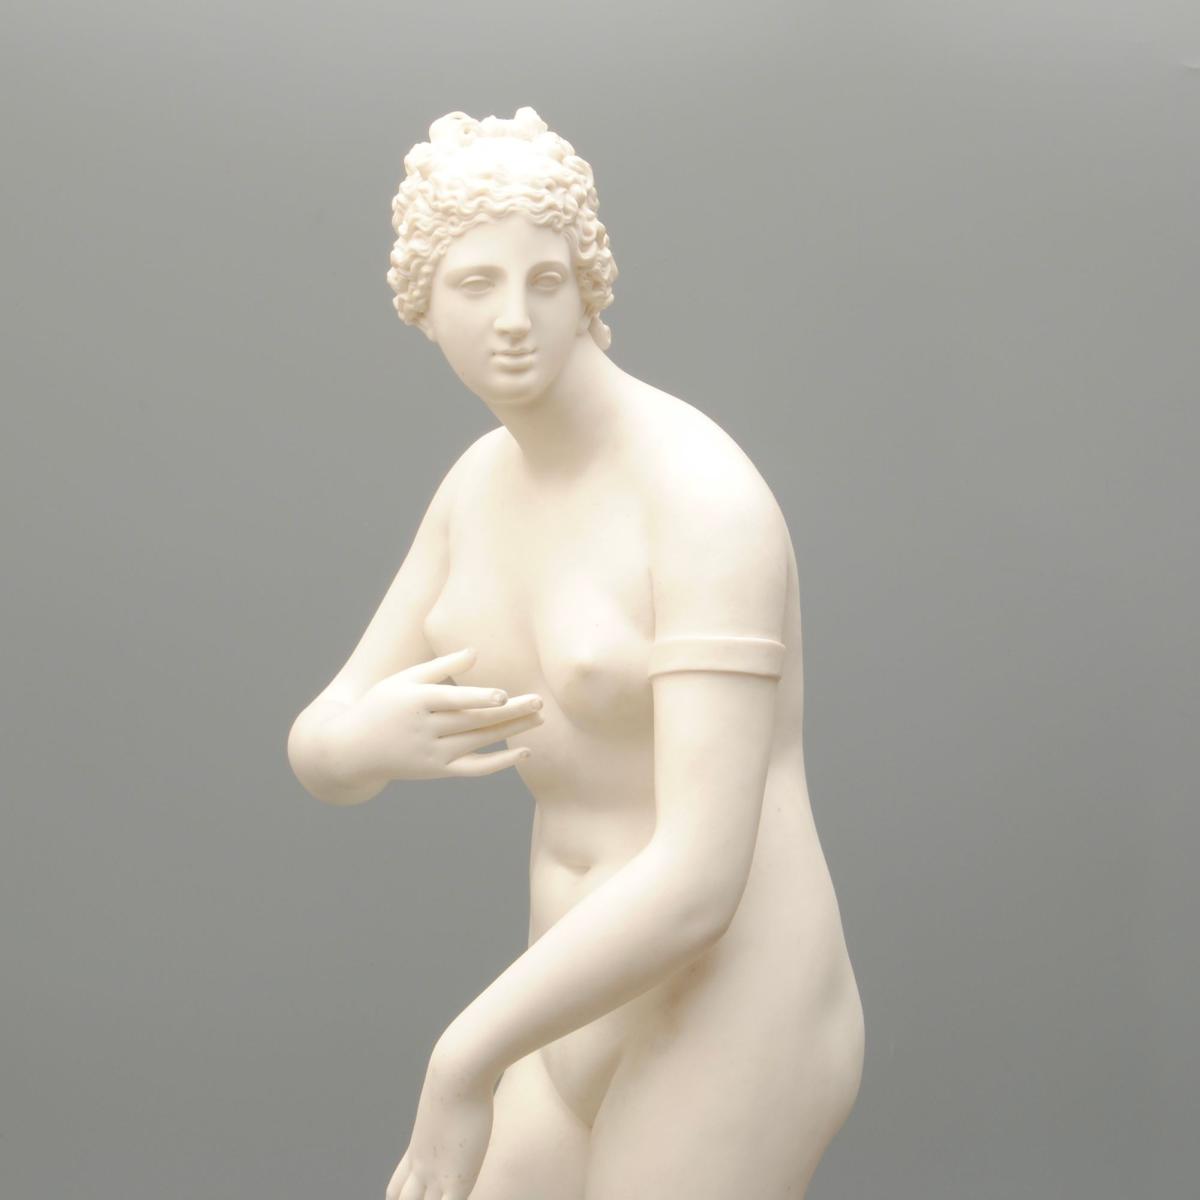 A Large Mid-19th Century Parian Figure of Diana